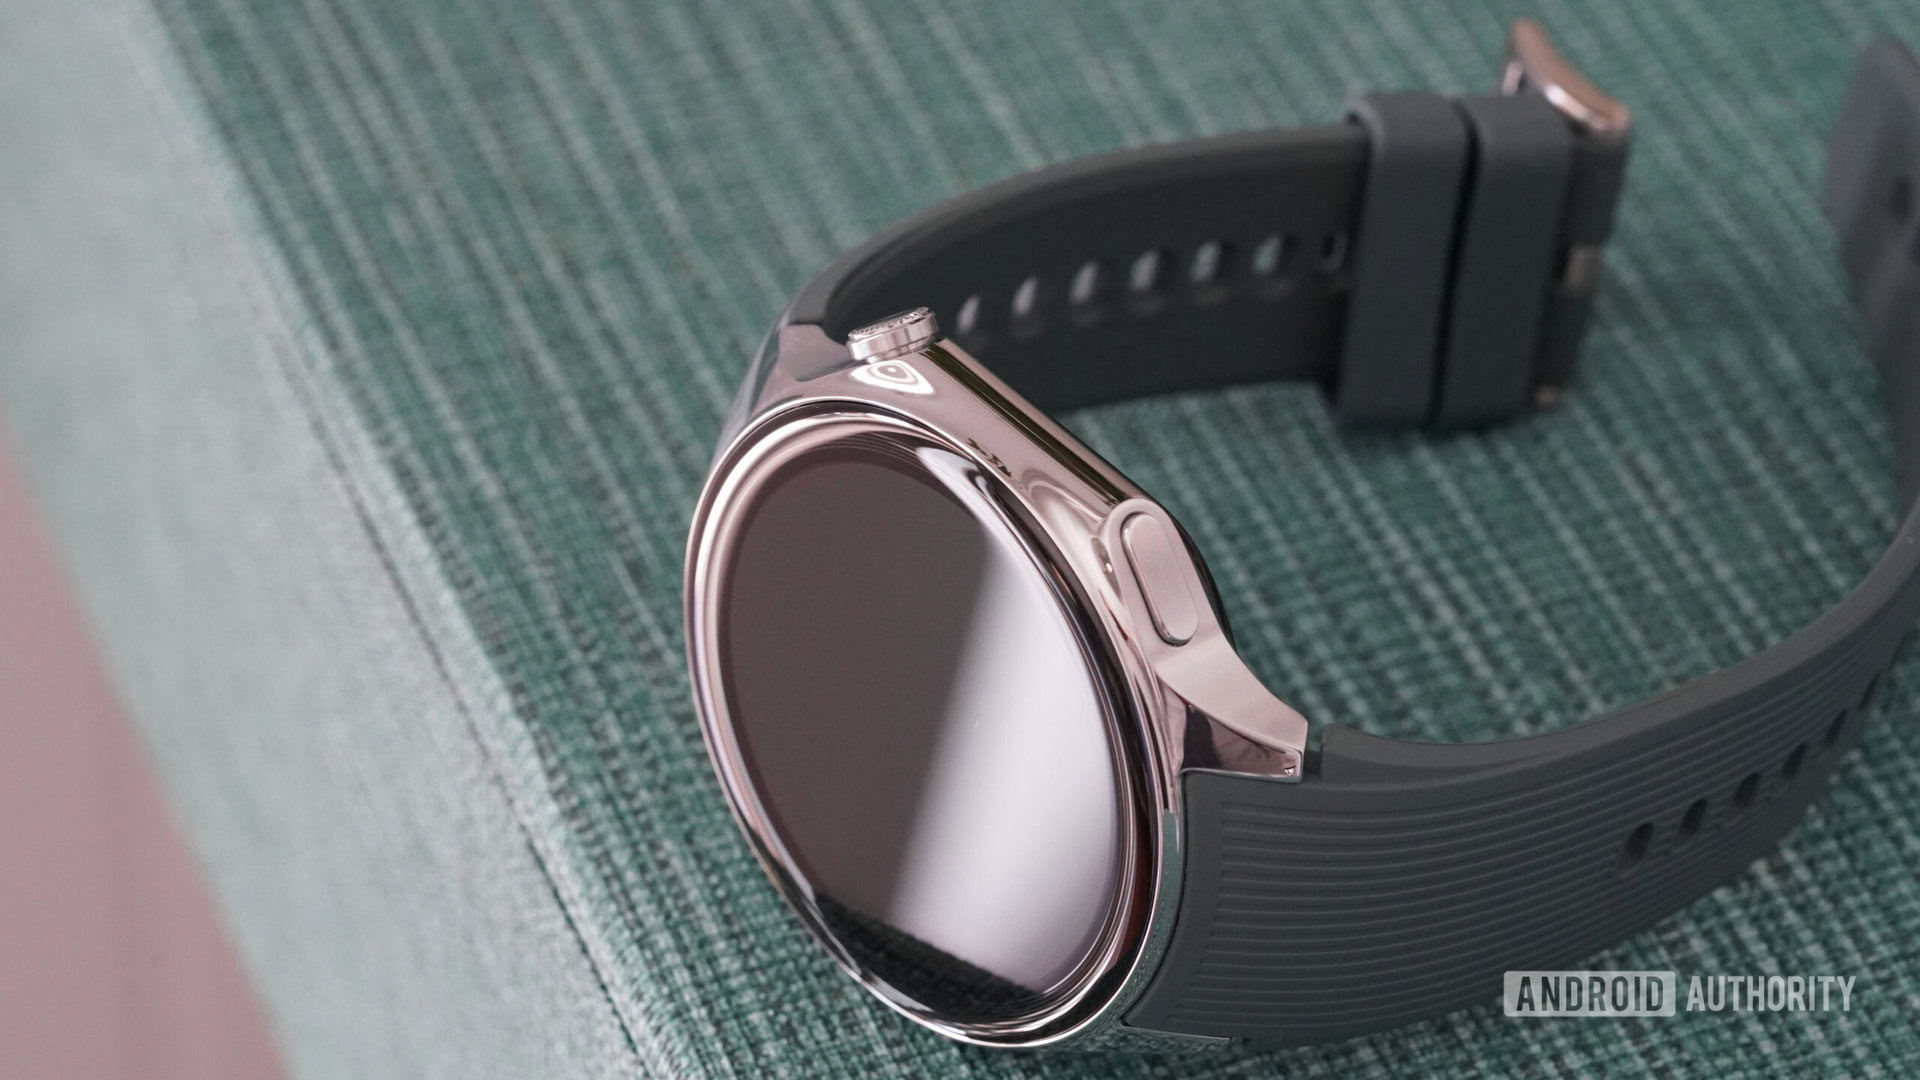 A OnePlus Watch 2 rests on its side, highlighting the device's button and Digital Crown.